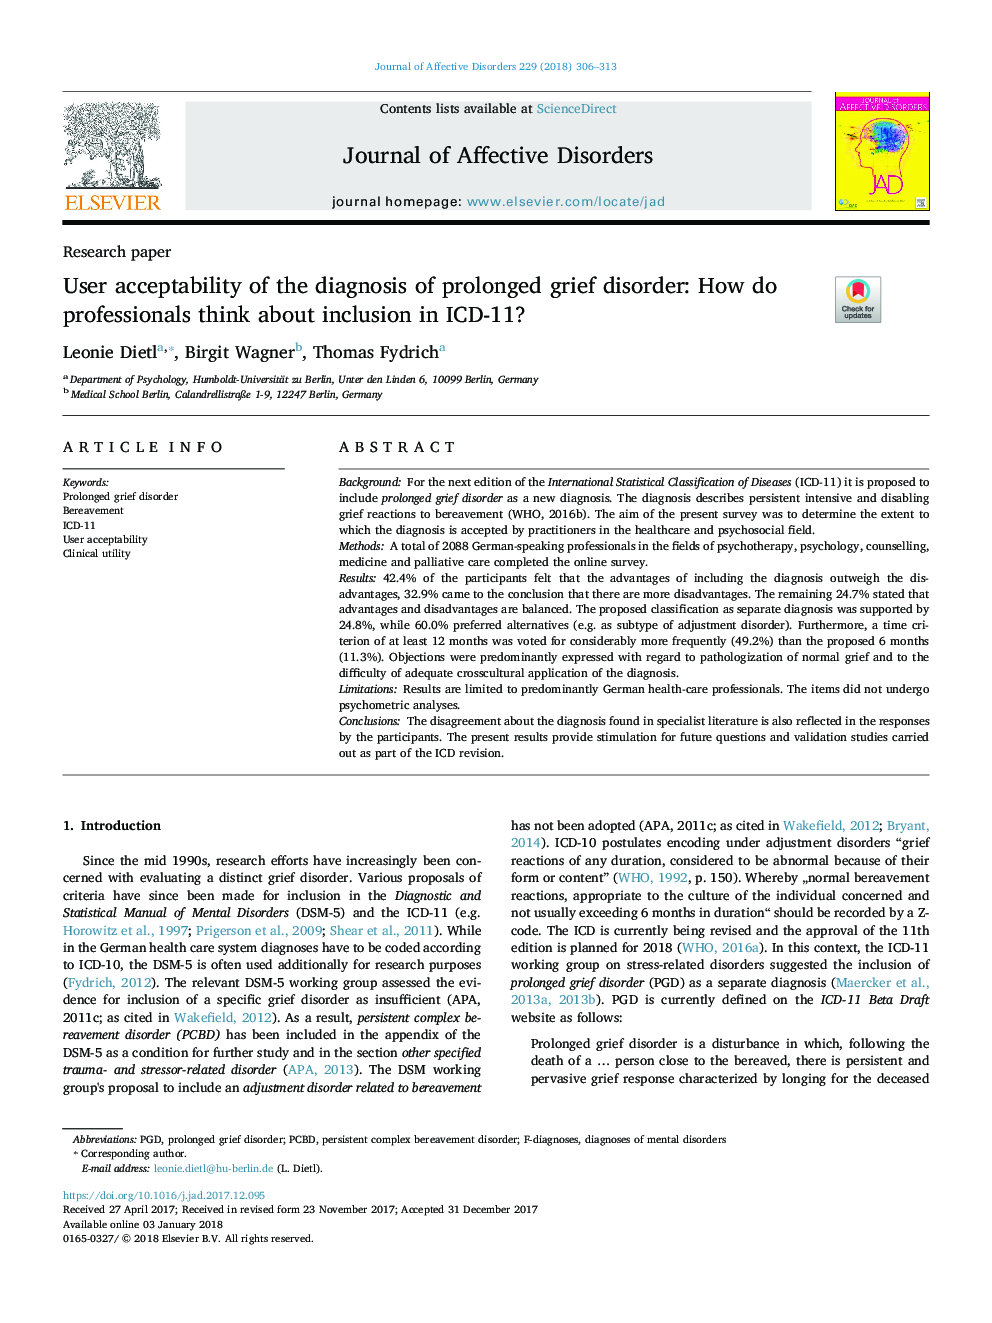 User acceptability of the diagnosis of prolonged grief disorder: How do professionals think about inclusion in ICD-11?